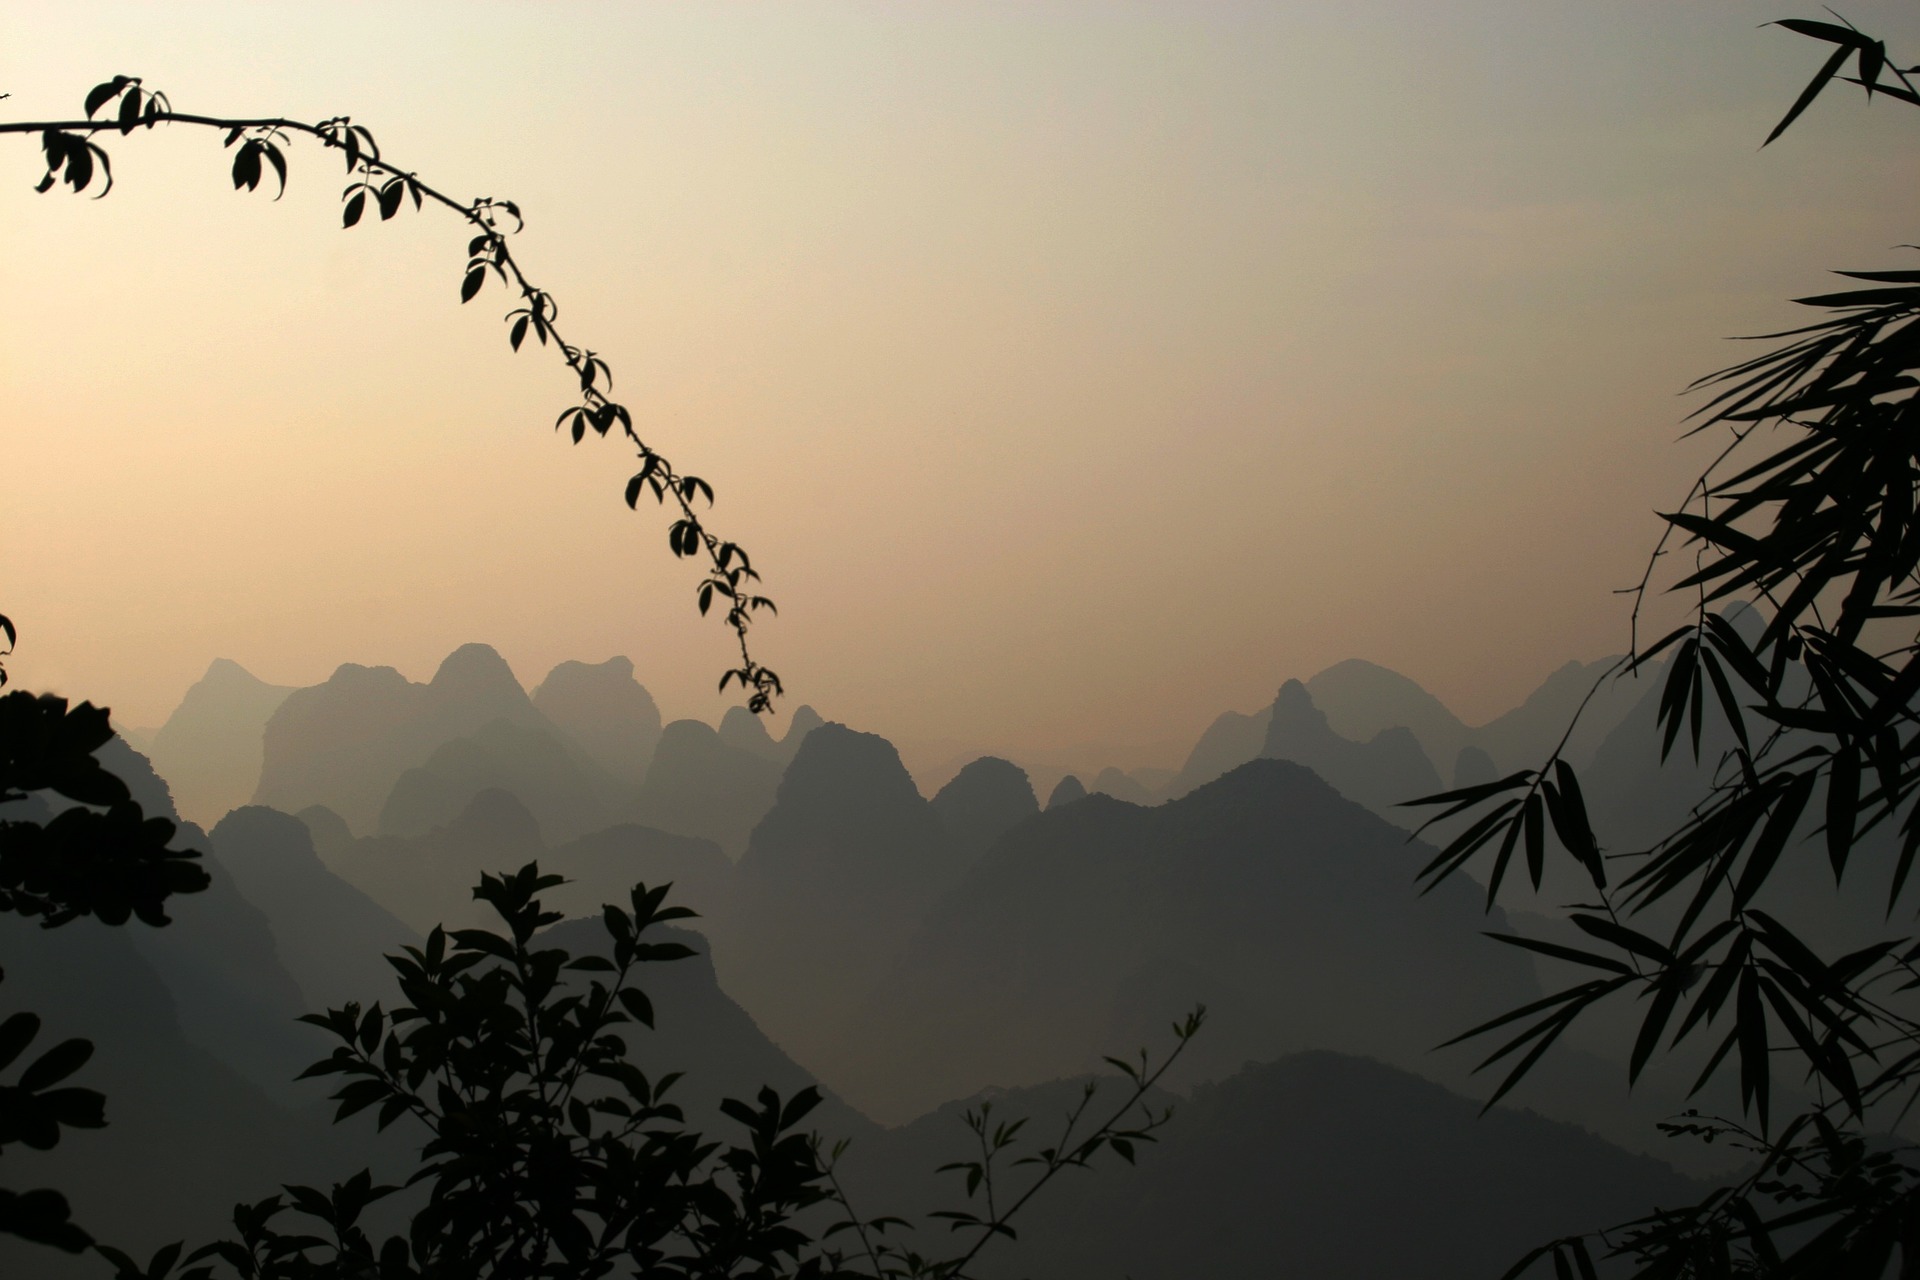 The Guilin Mountains showing the shades of blue you can expect from a Chinese mountain landscape at dusk.